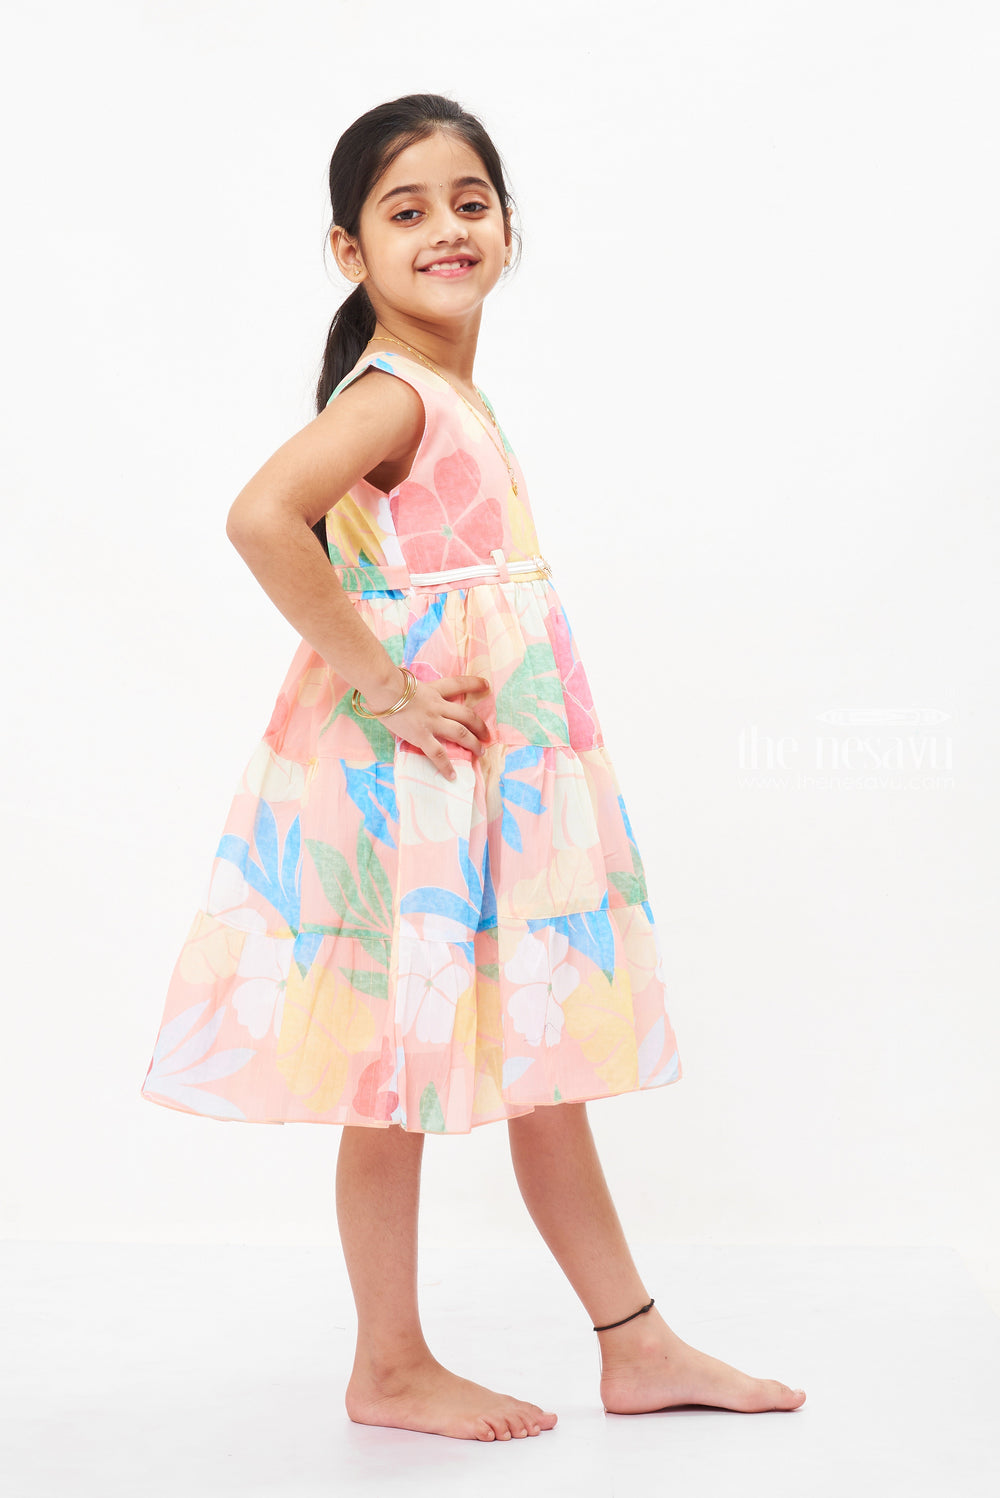 The Nesavu Girls Fancy Frock Pastel Watercolor Floral Girls Dress with Cinched Waist - Perfect for Sunny Days Nesavu Pastel Floral Dresses for Girls | Light & Airy Summer Styles | The Nesavu